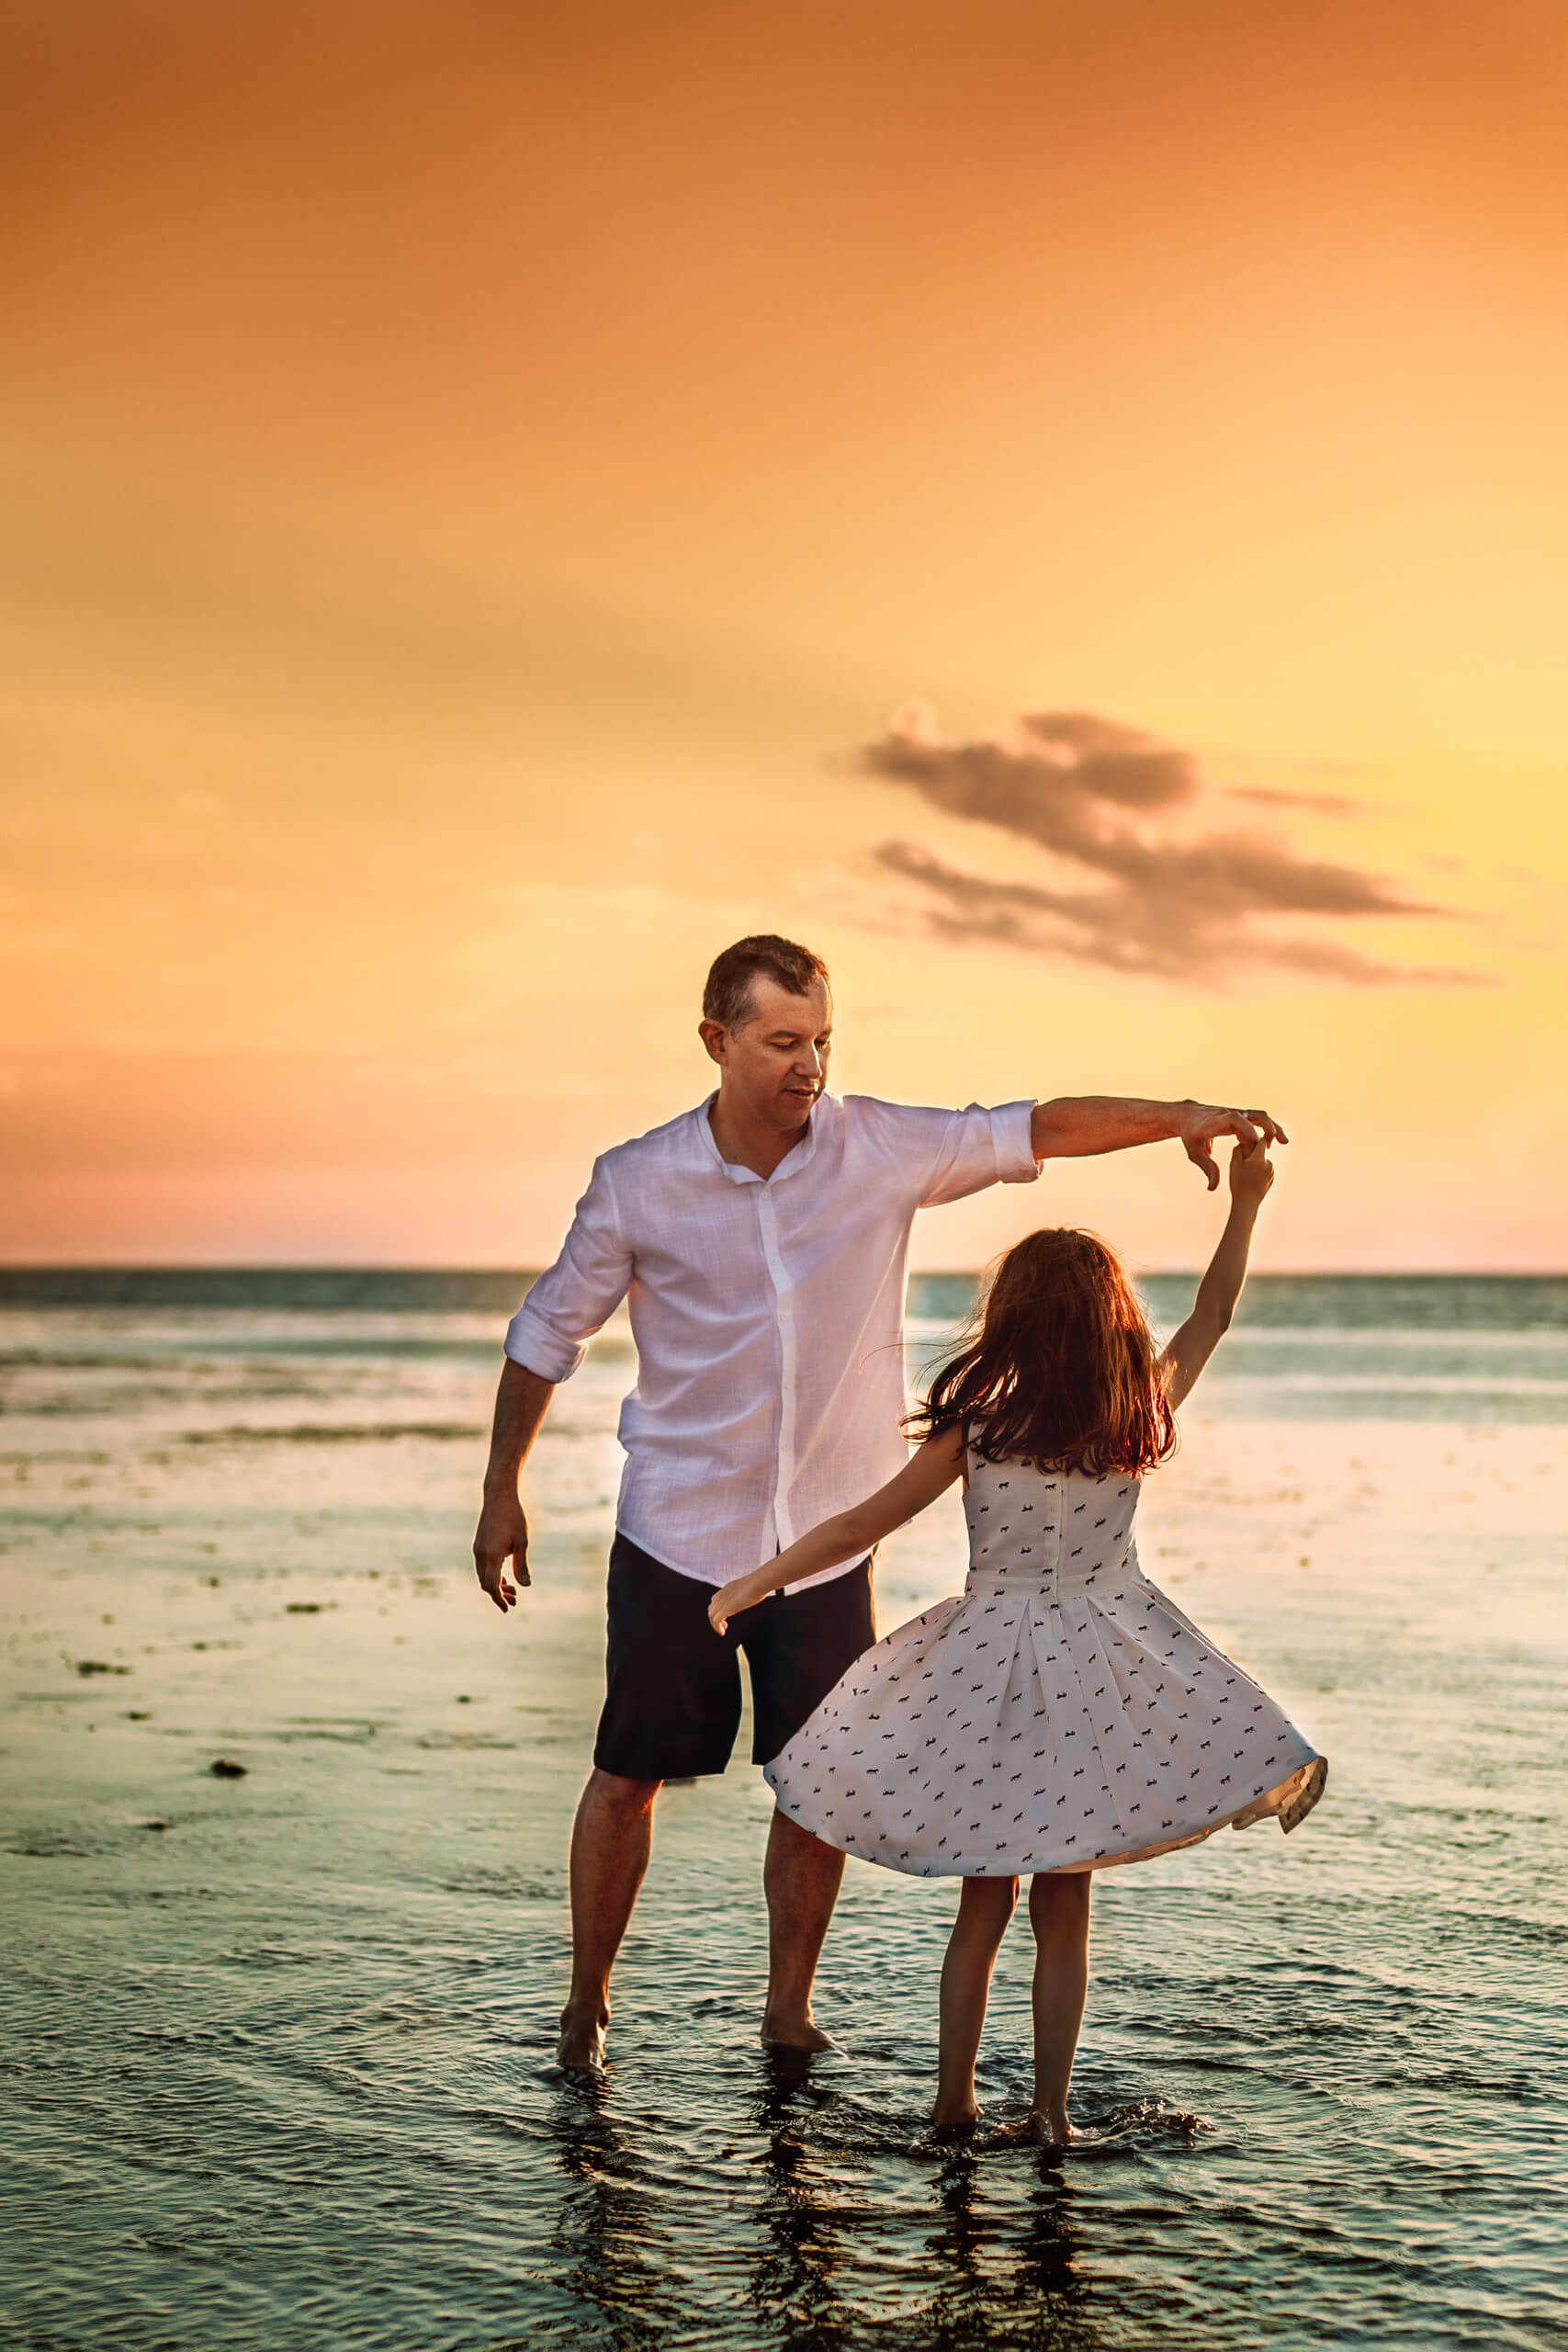 Beach Photo Sessions - dad and daughter dancing - Andre Toro Photography - Cape Cod